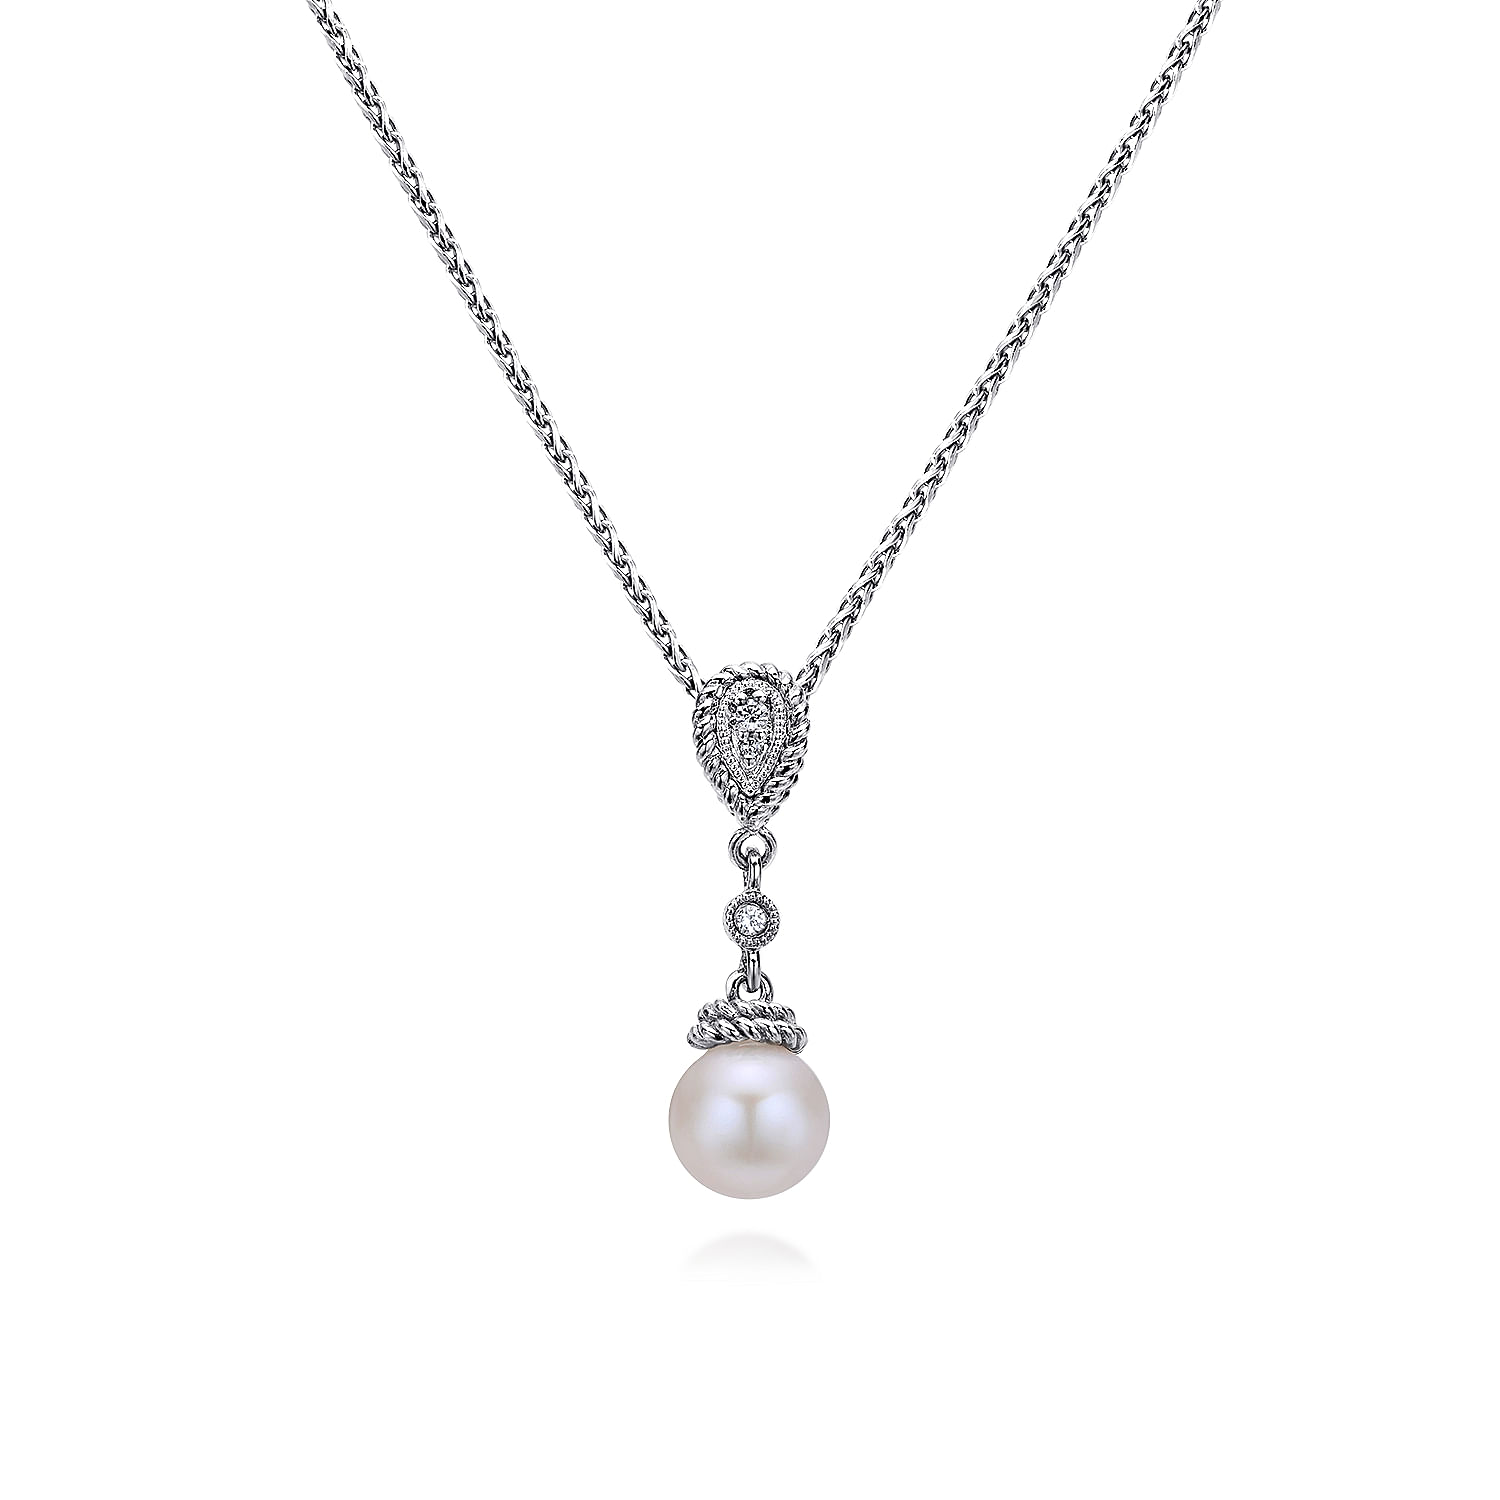 14K White Gold Cultured Pearl and Diamond Accent Pendant Necklace